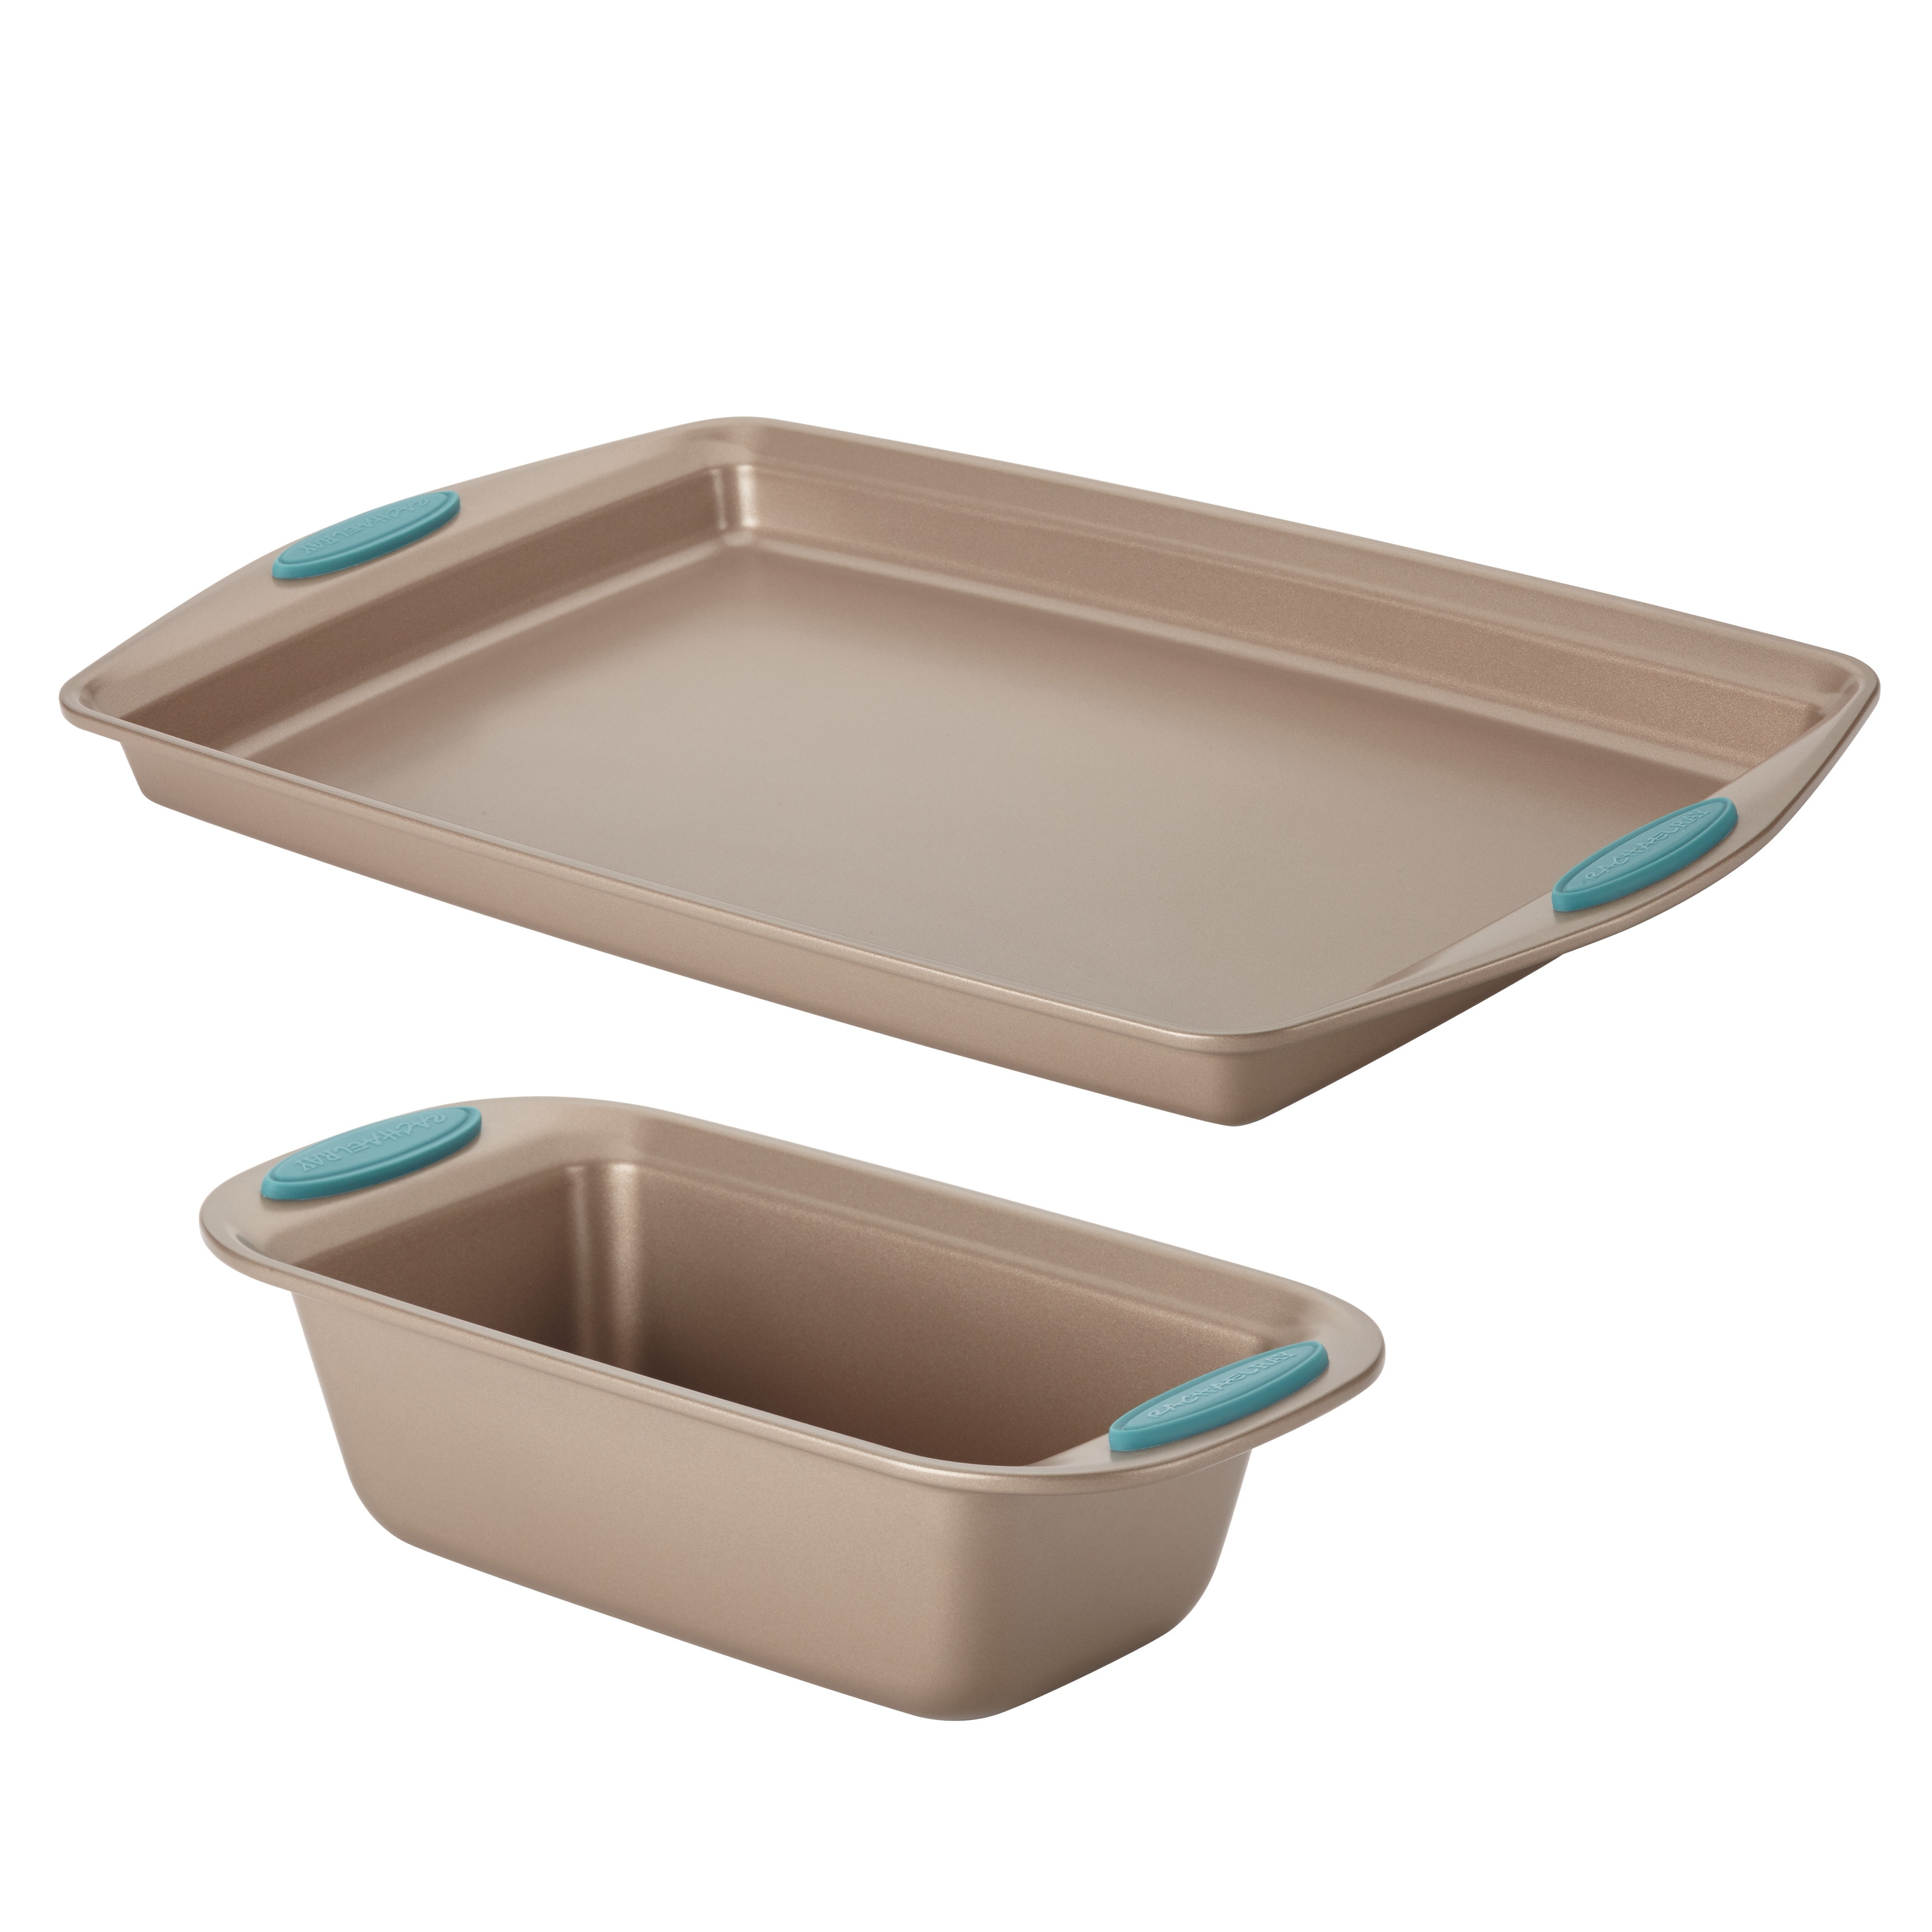 https://ak1.ostkcdn.com/images/products/is/images/direct/b482d2bc92dce2255a0680599db608354f217481/Rachael-Ray-Nonstick-Loaf-Pan-and-Sheet-Pan-Set%2C-2-Piece.jpg